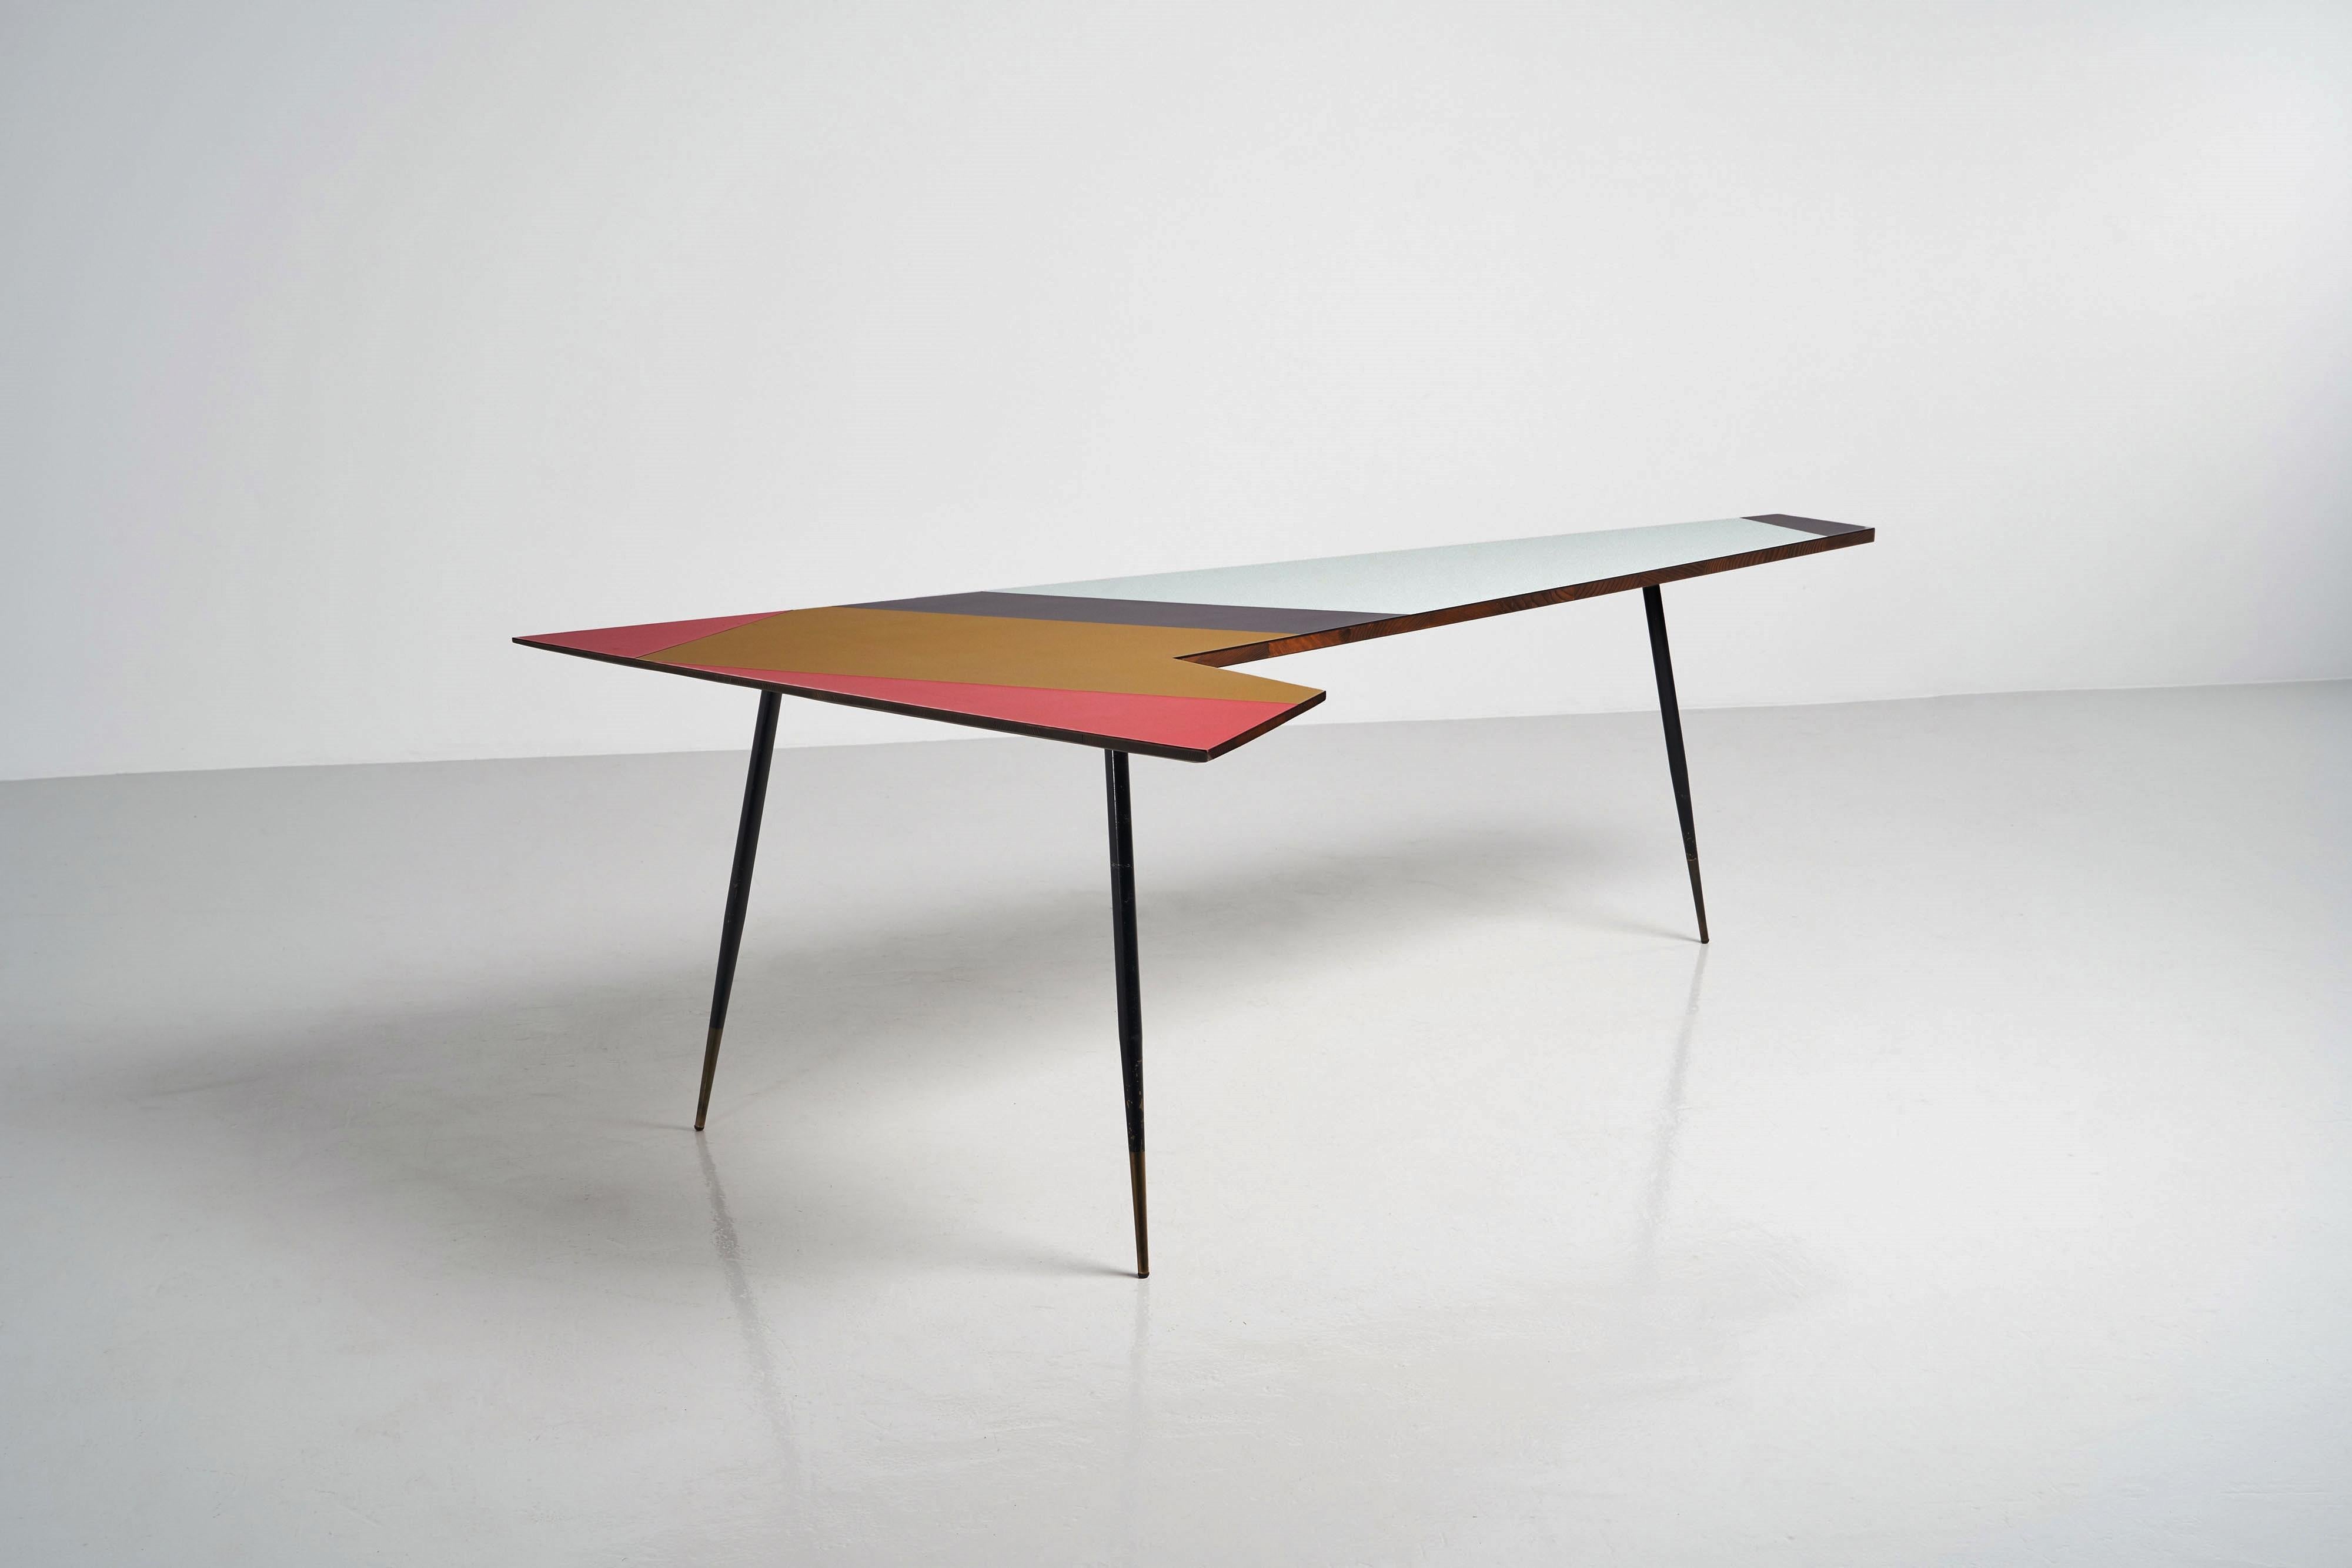 Step back into the iconic Italian style of the 1950s with this Ponti-inspired asymmetrical boomerang desk. The desk’s plywood top features a high gloss laminated finish with coloured abstract shapes in shades of red, gold, anthracite and light blue,